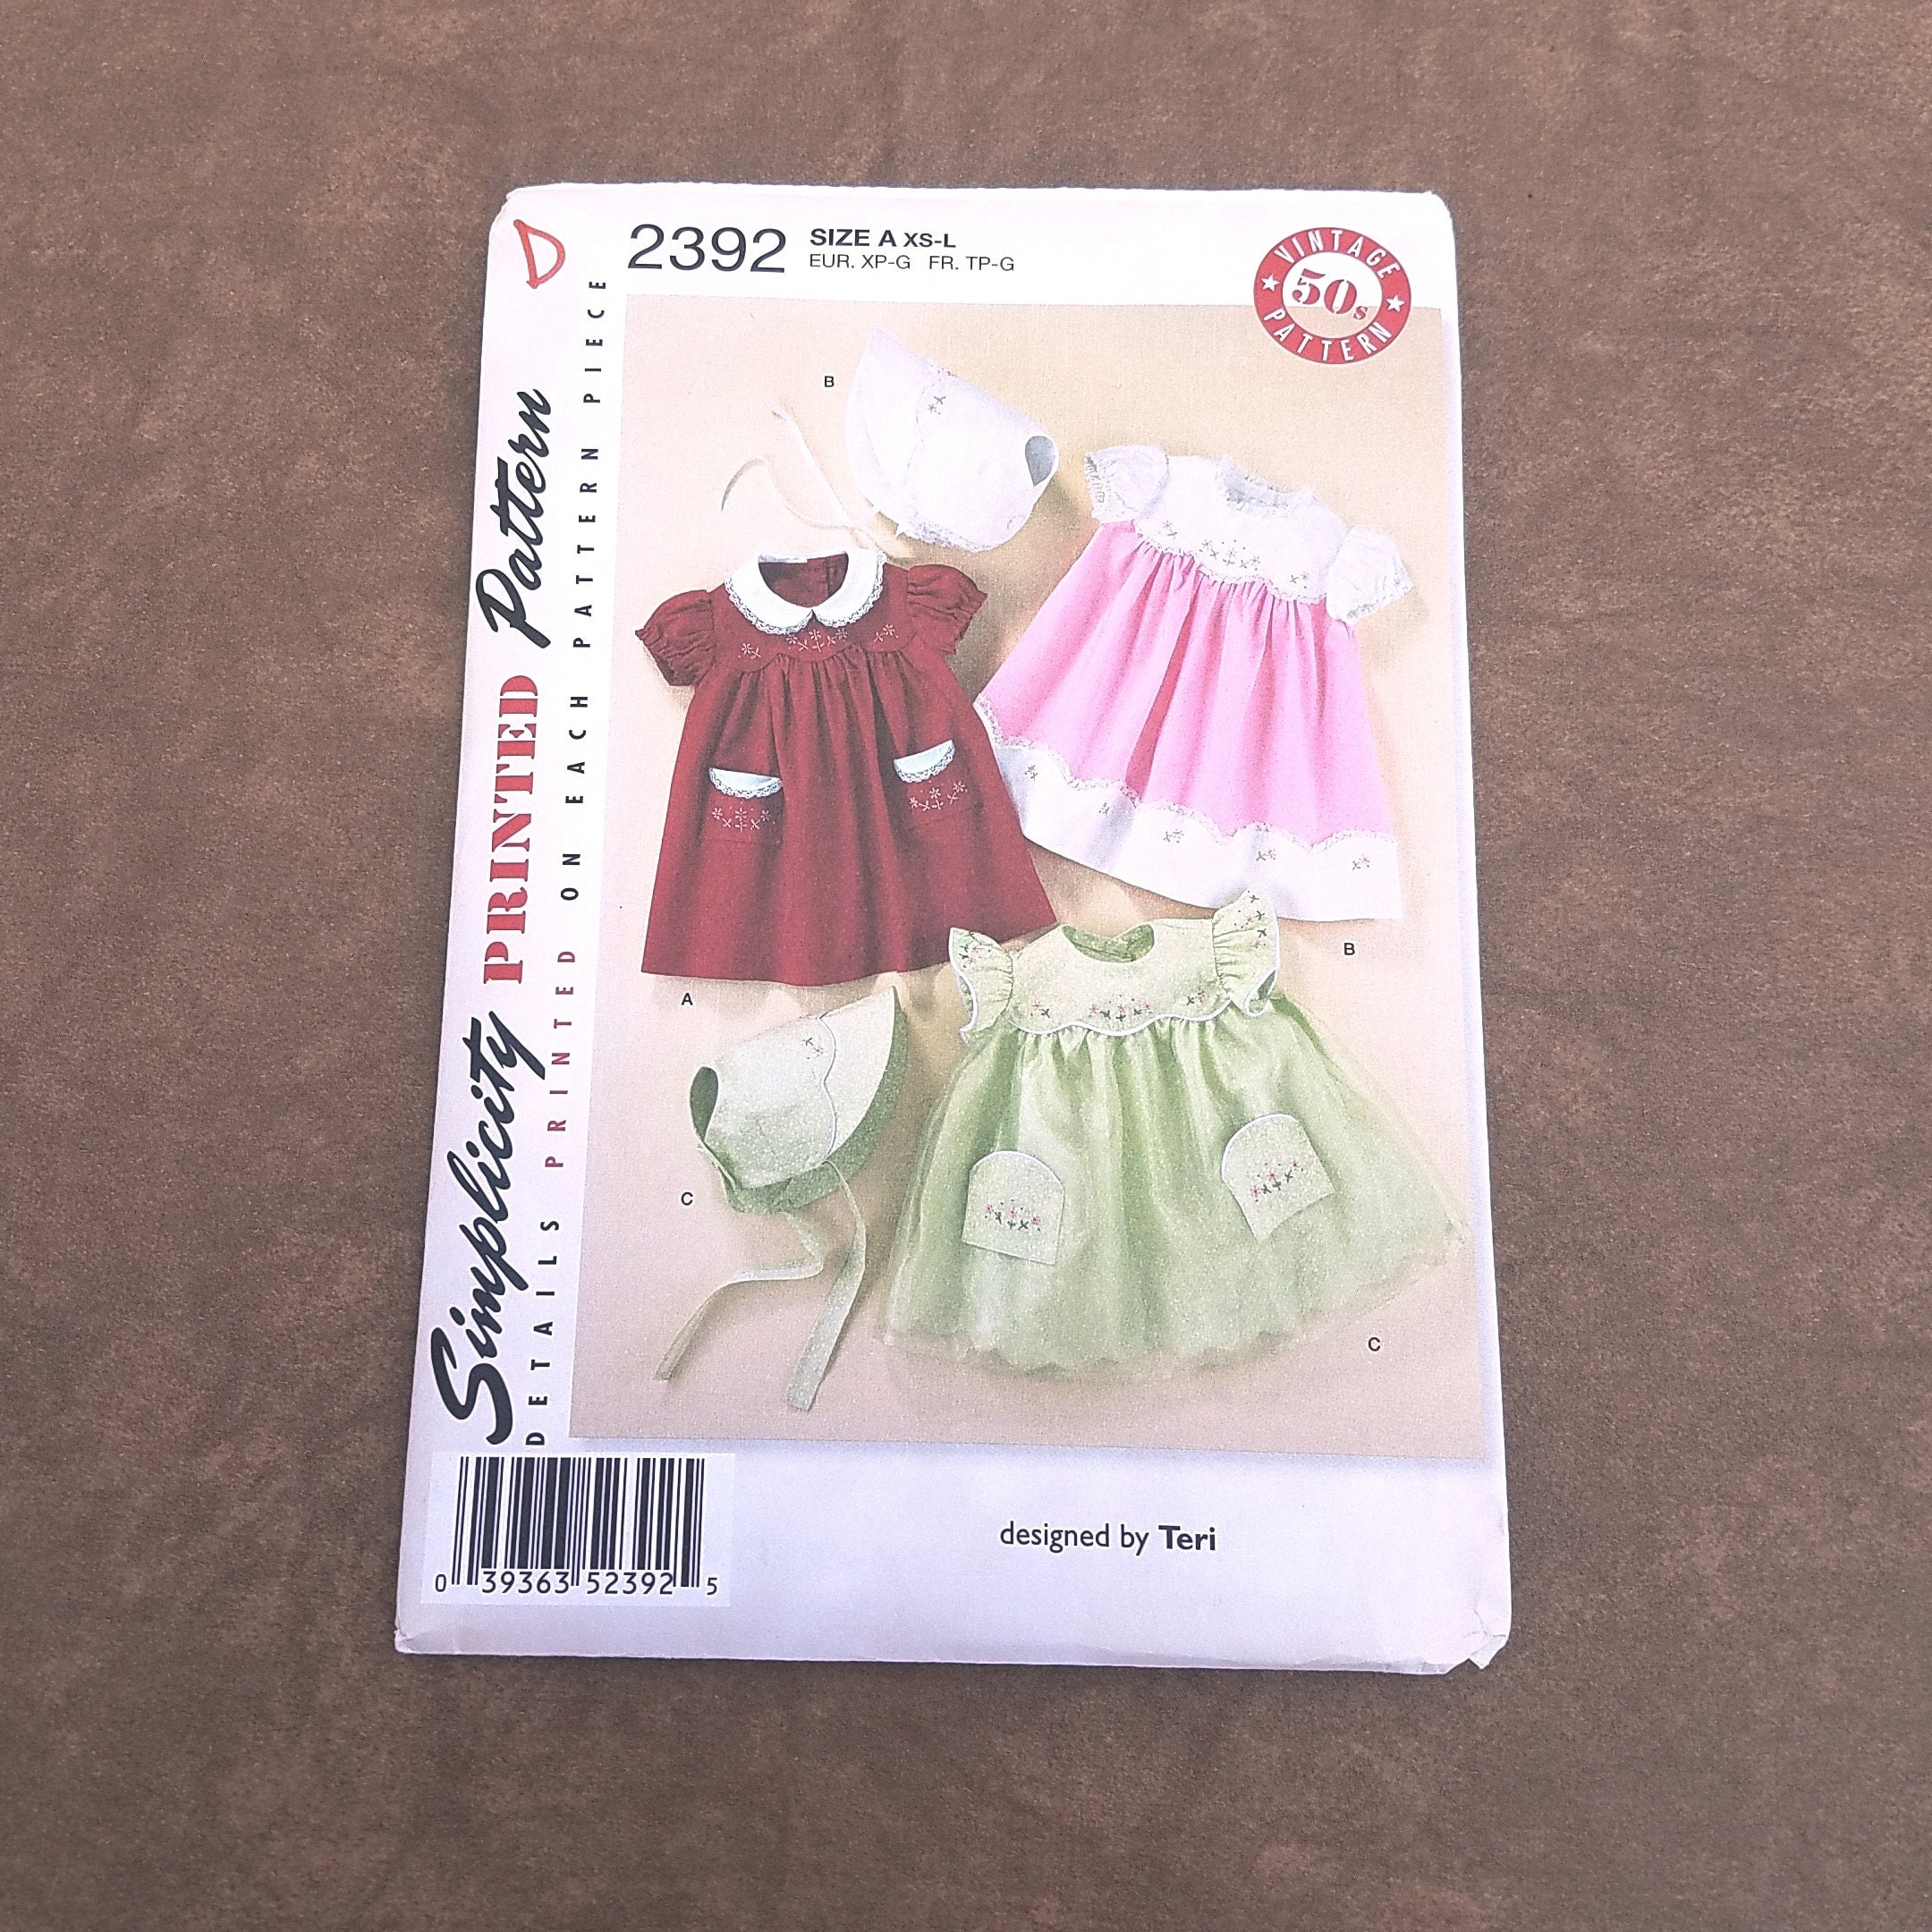 New Uncut Simplicity Pattern 2392 Baby Size XS to L Dress Bonnet With Embroidery 